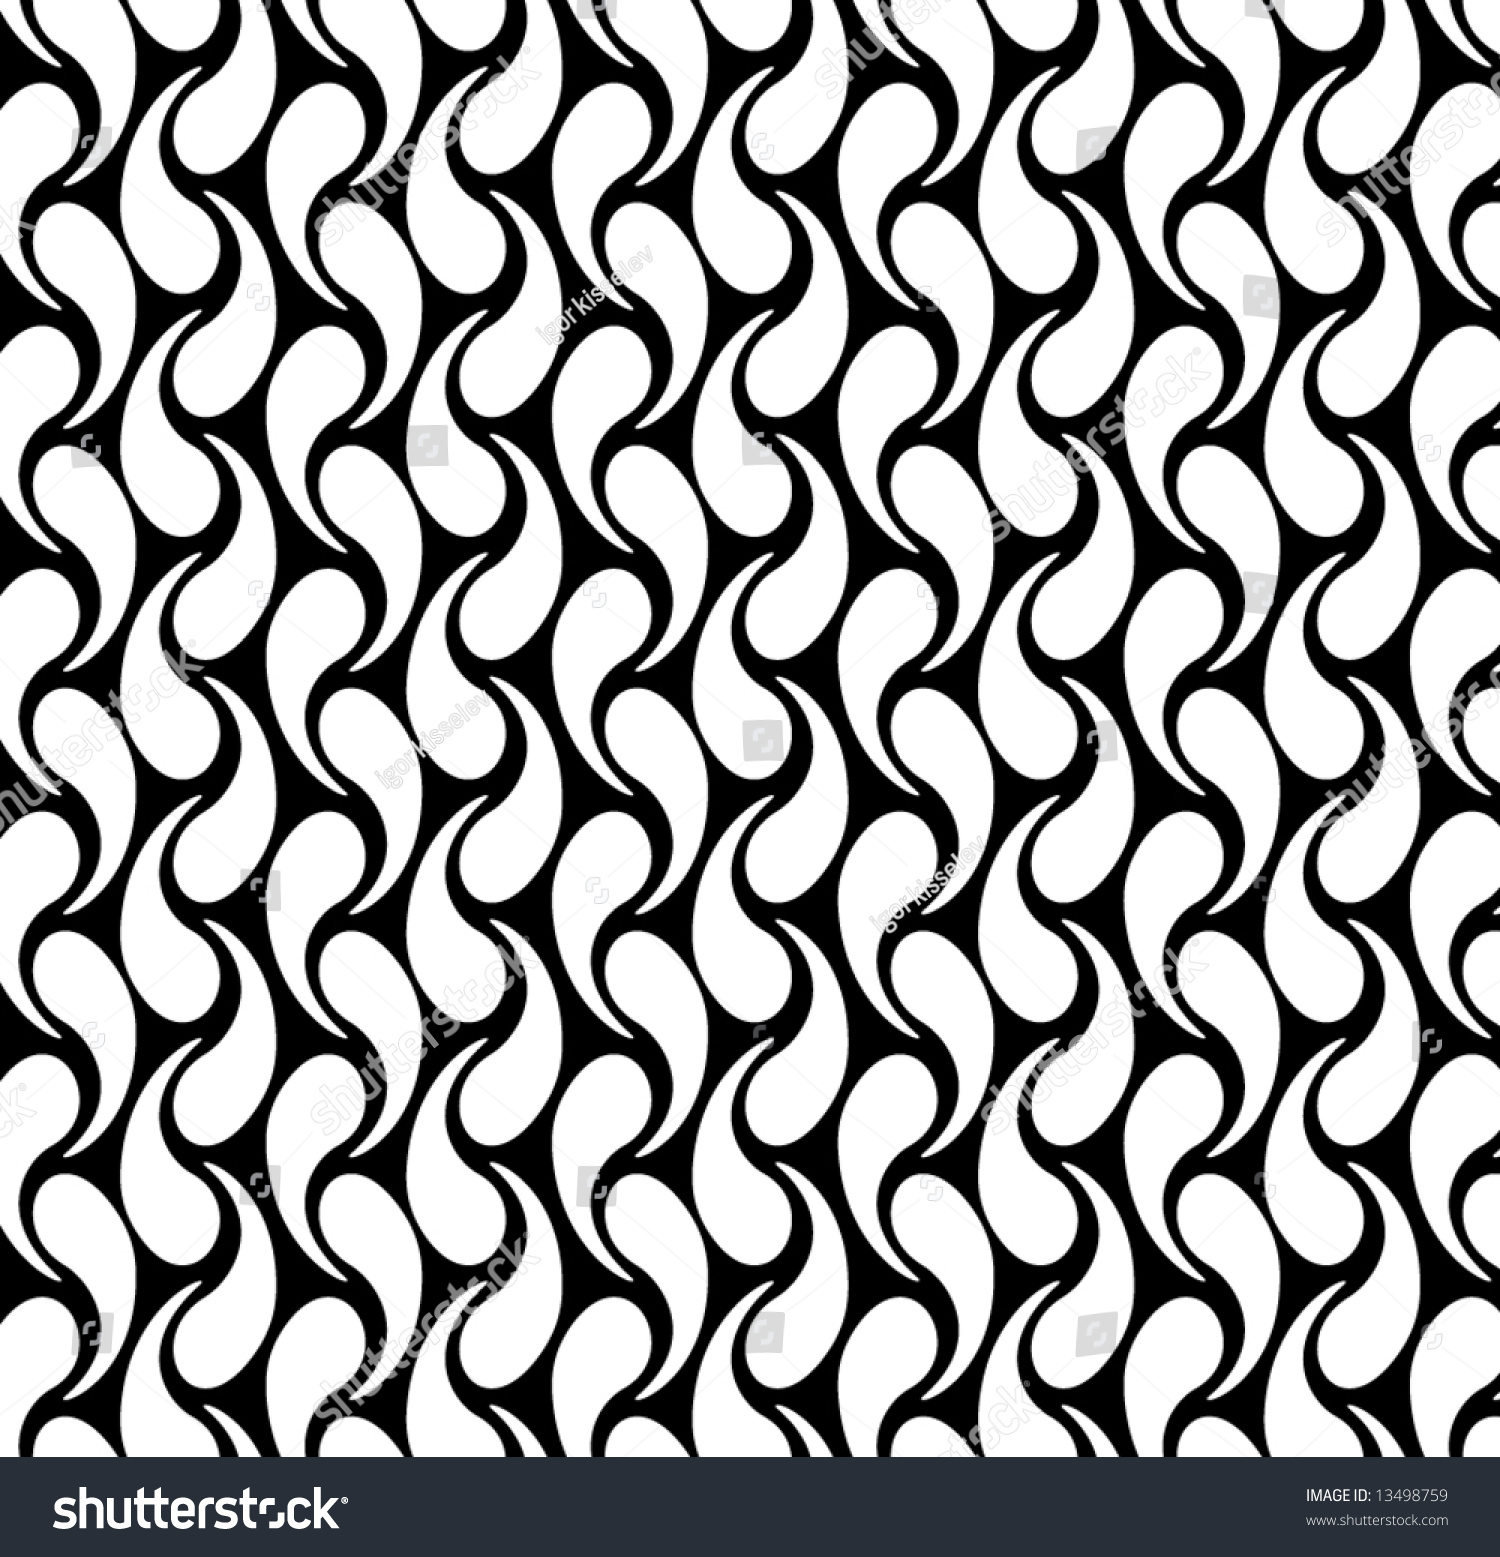 Chain Mail - Seamless Background Pattern Stock Vector Illustration ...